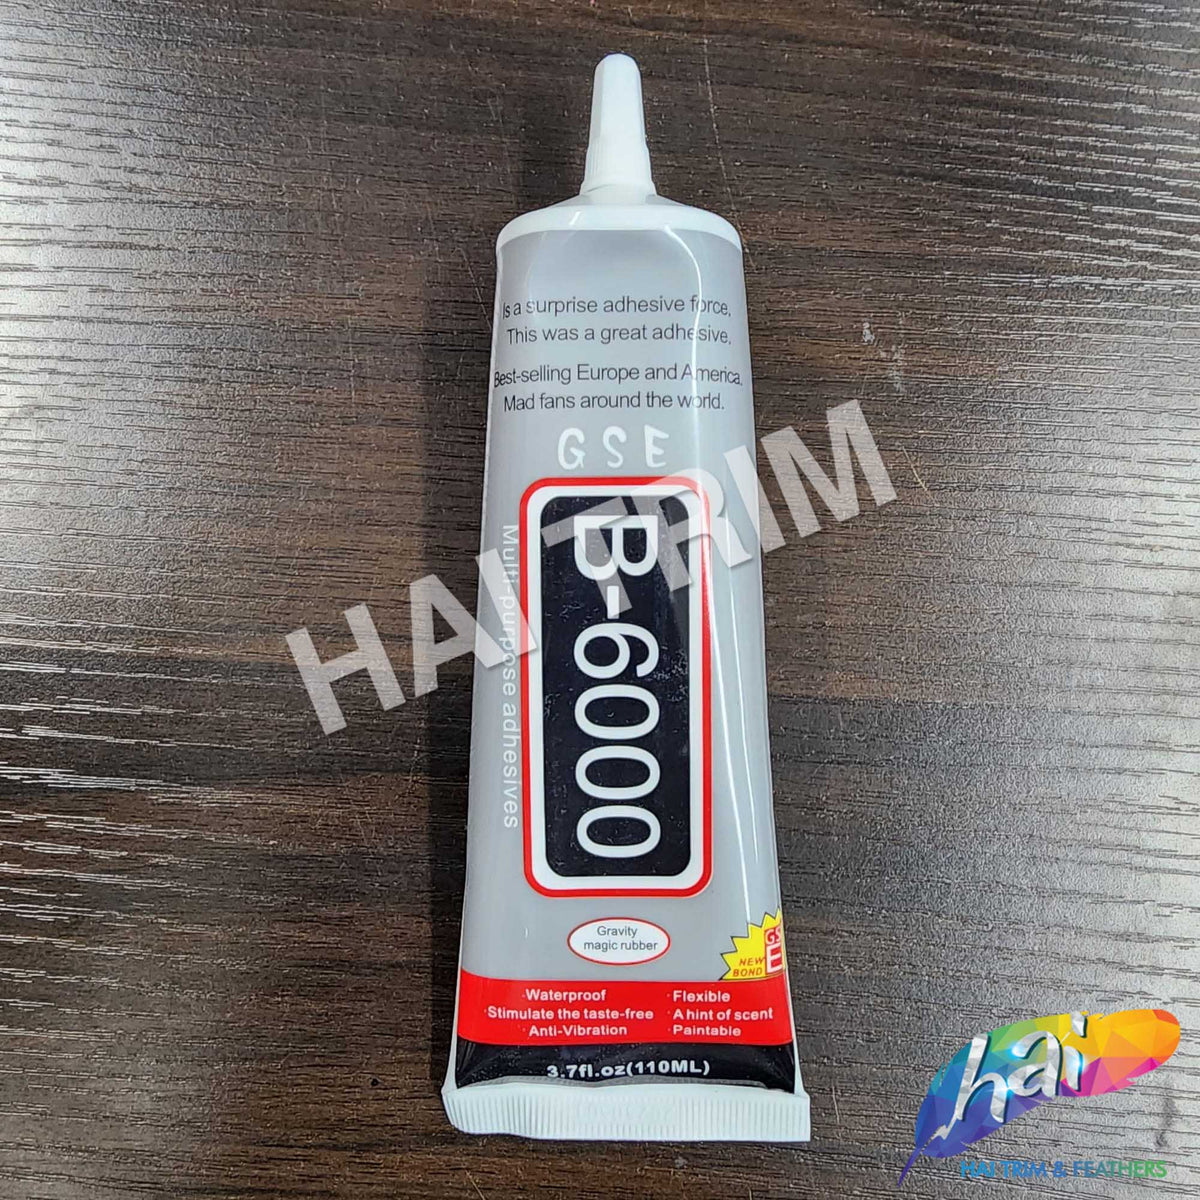 B6000 Adhesive Glue, 3.7 FL OZ With Attached Nozzle Tip (110 mL